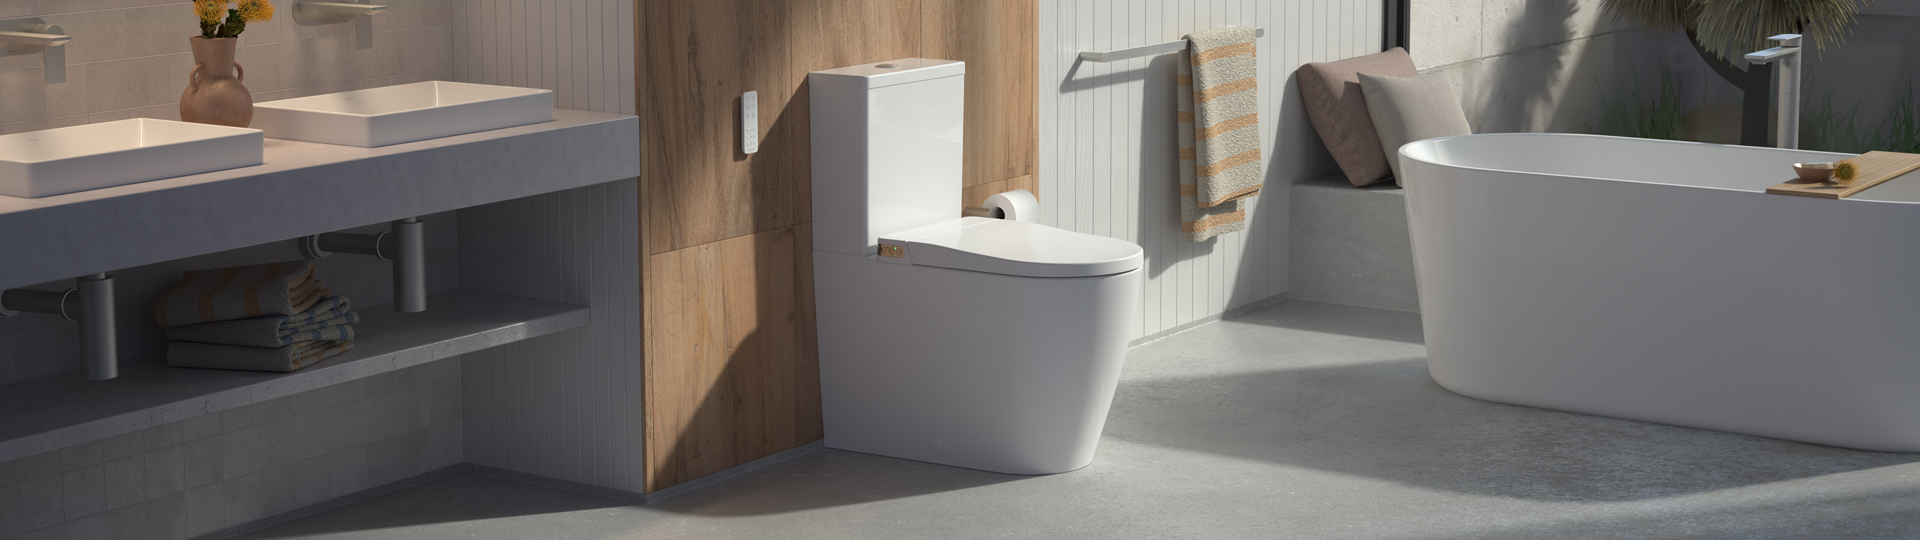 Smart toilet in modern bathroom of white with wood accents